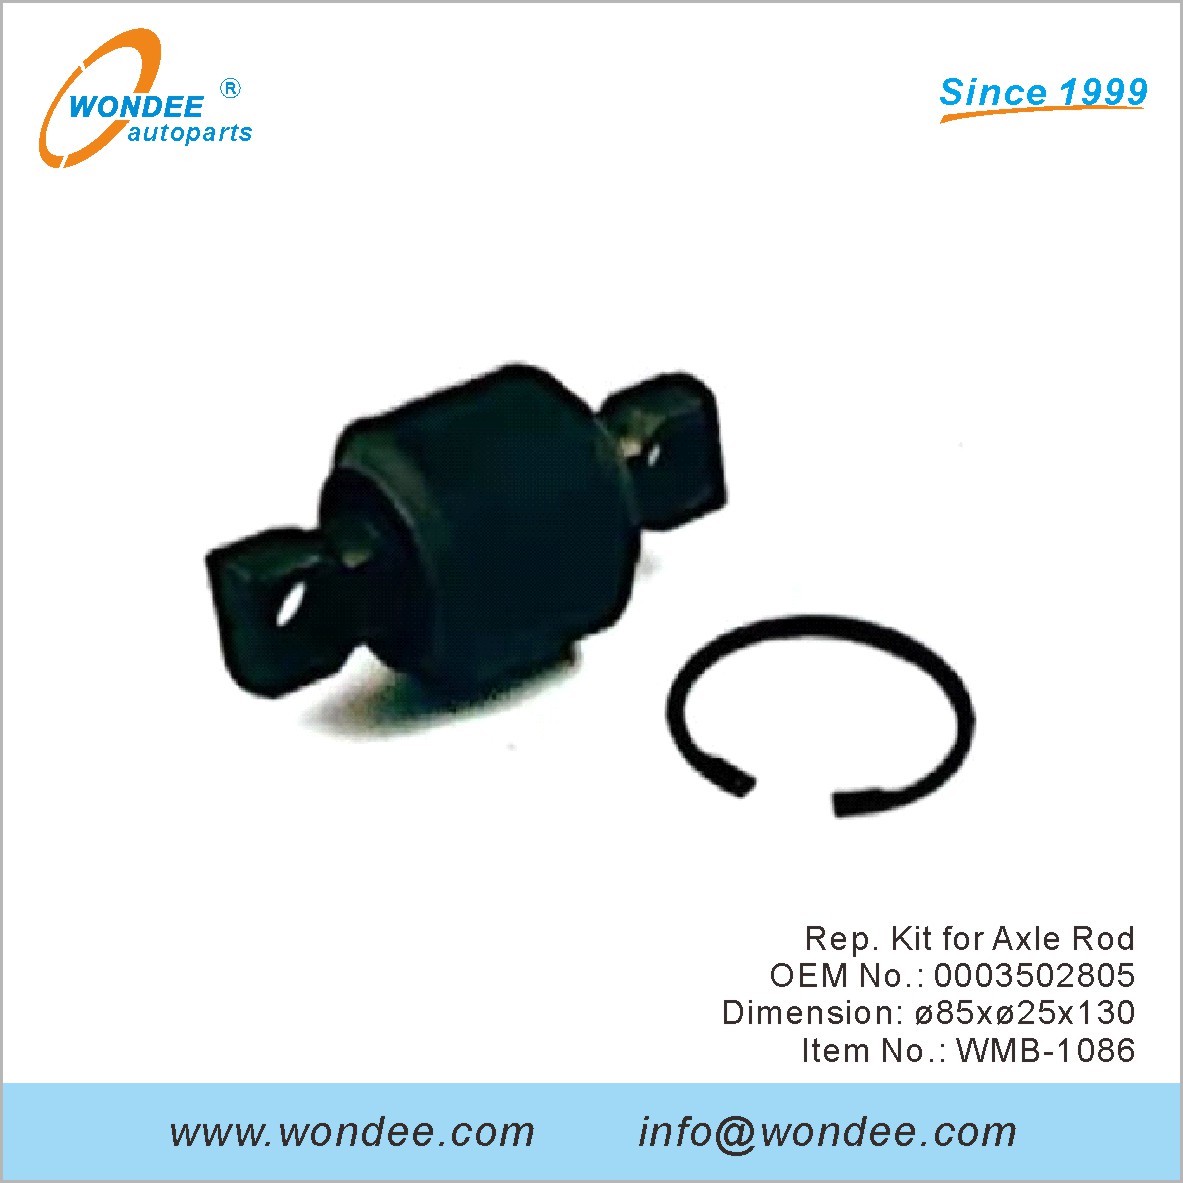 Rep. Kit for Axle Rod OEM 0003502805 for Benz from WONDEE